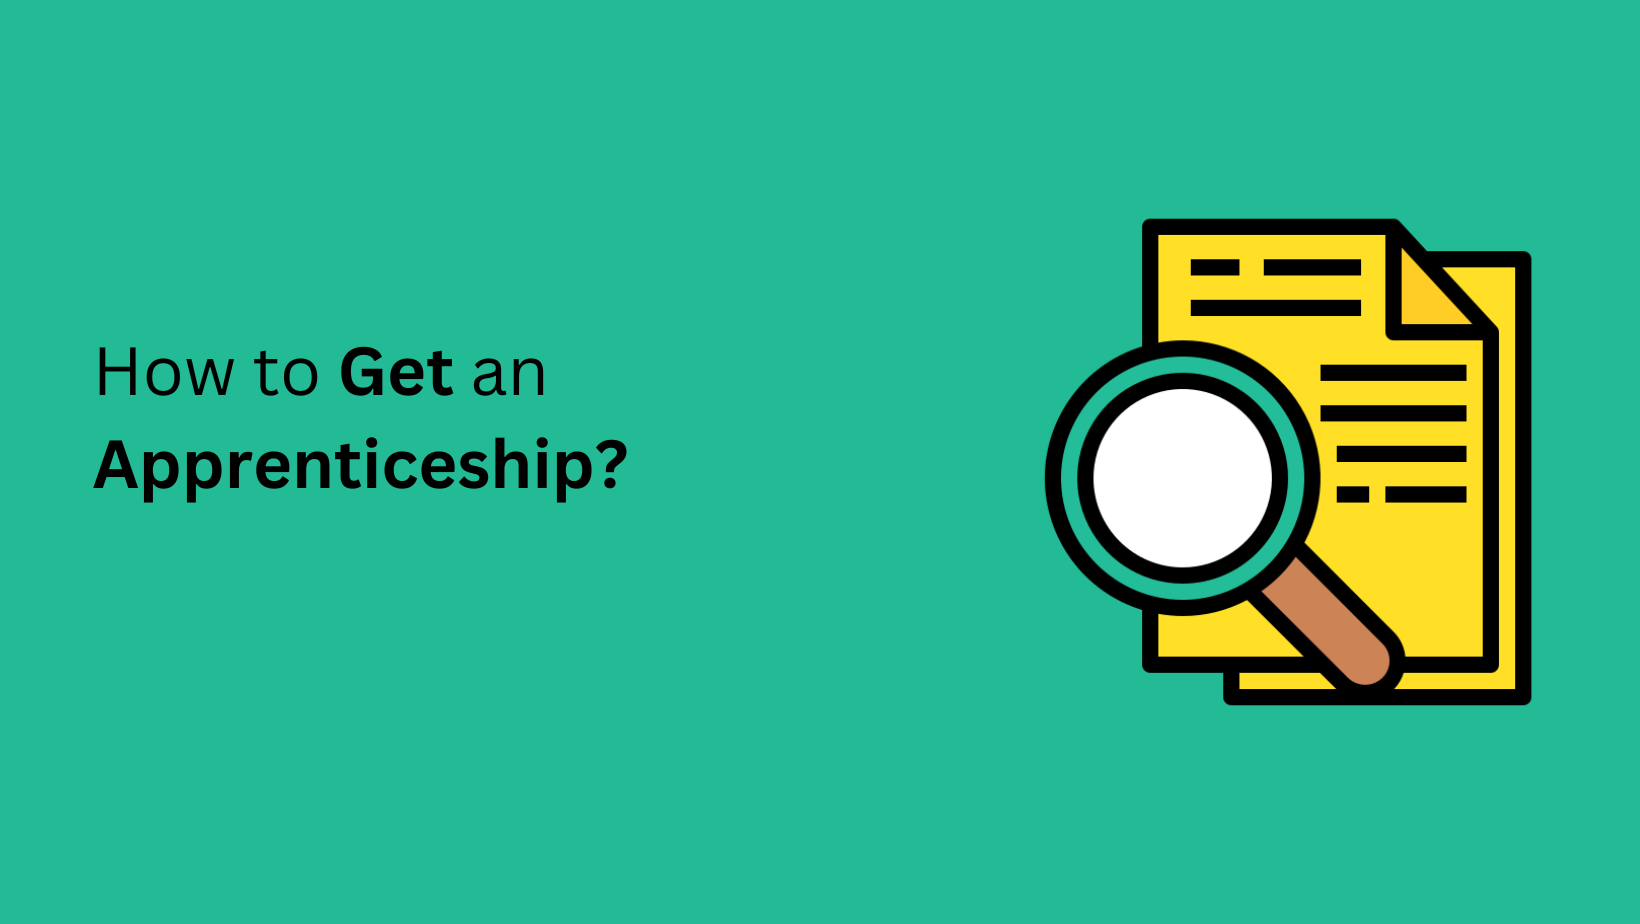 How to Get an Apprenticeship